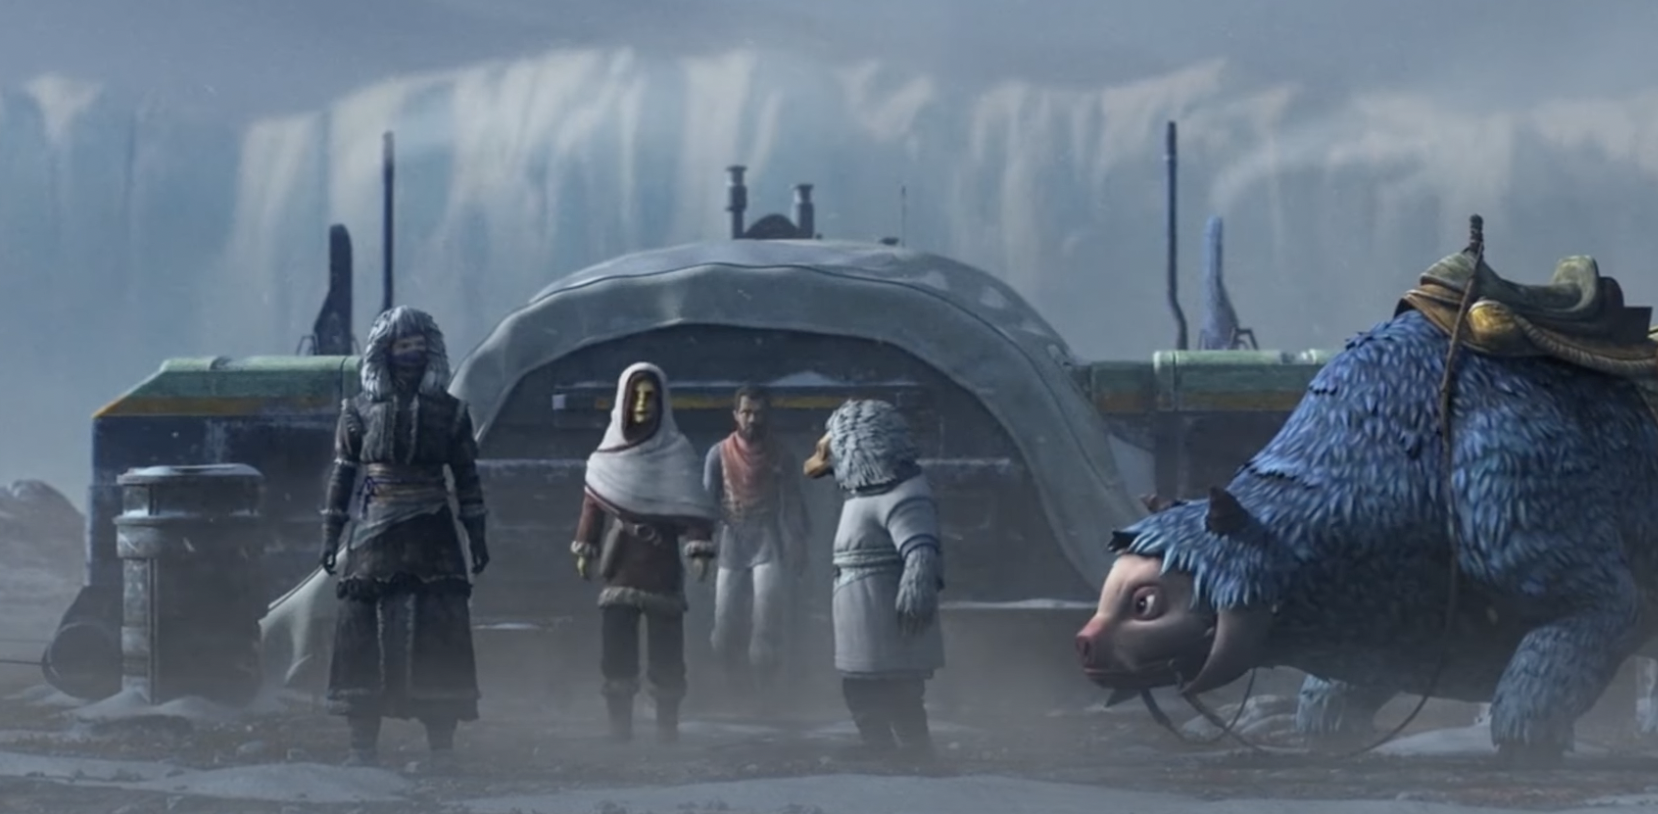 Review: ‘Tales of the Empire’ Season 1 Episode 6 “The Way Out”